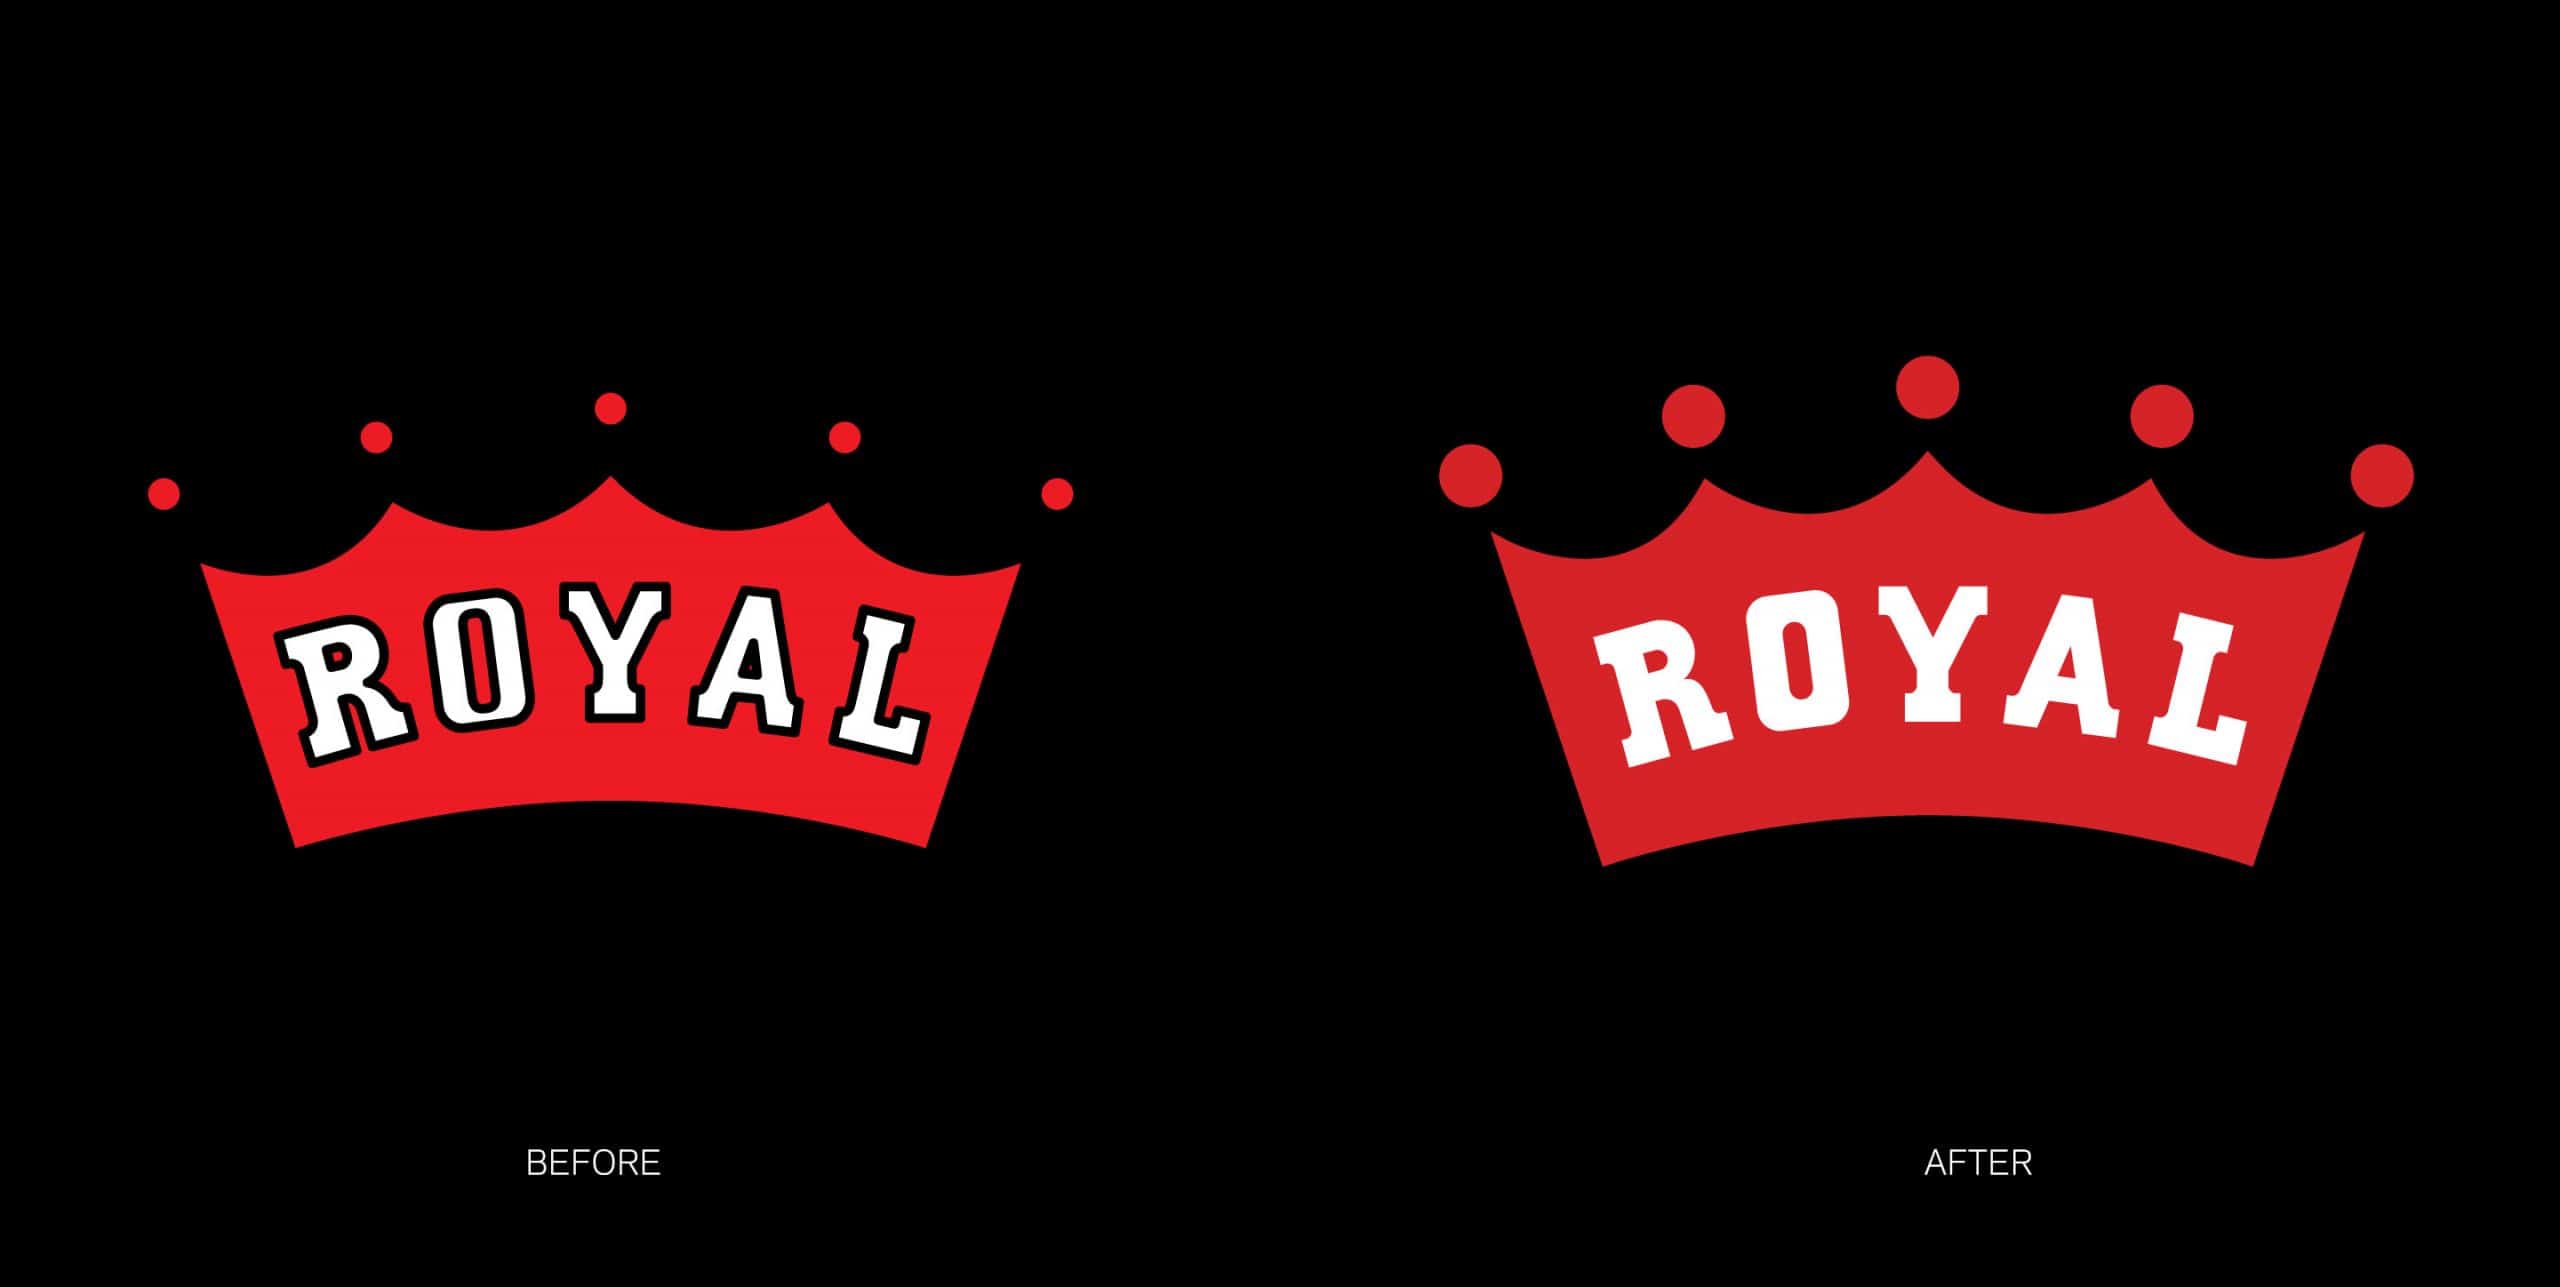 Royal identity before and after on black background